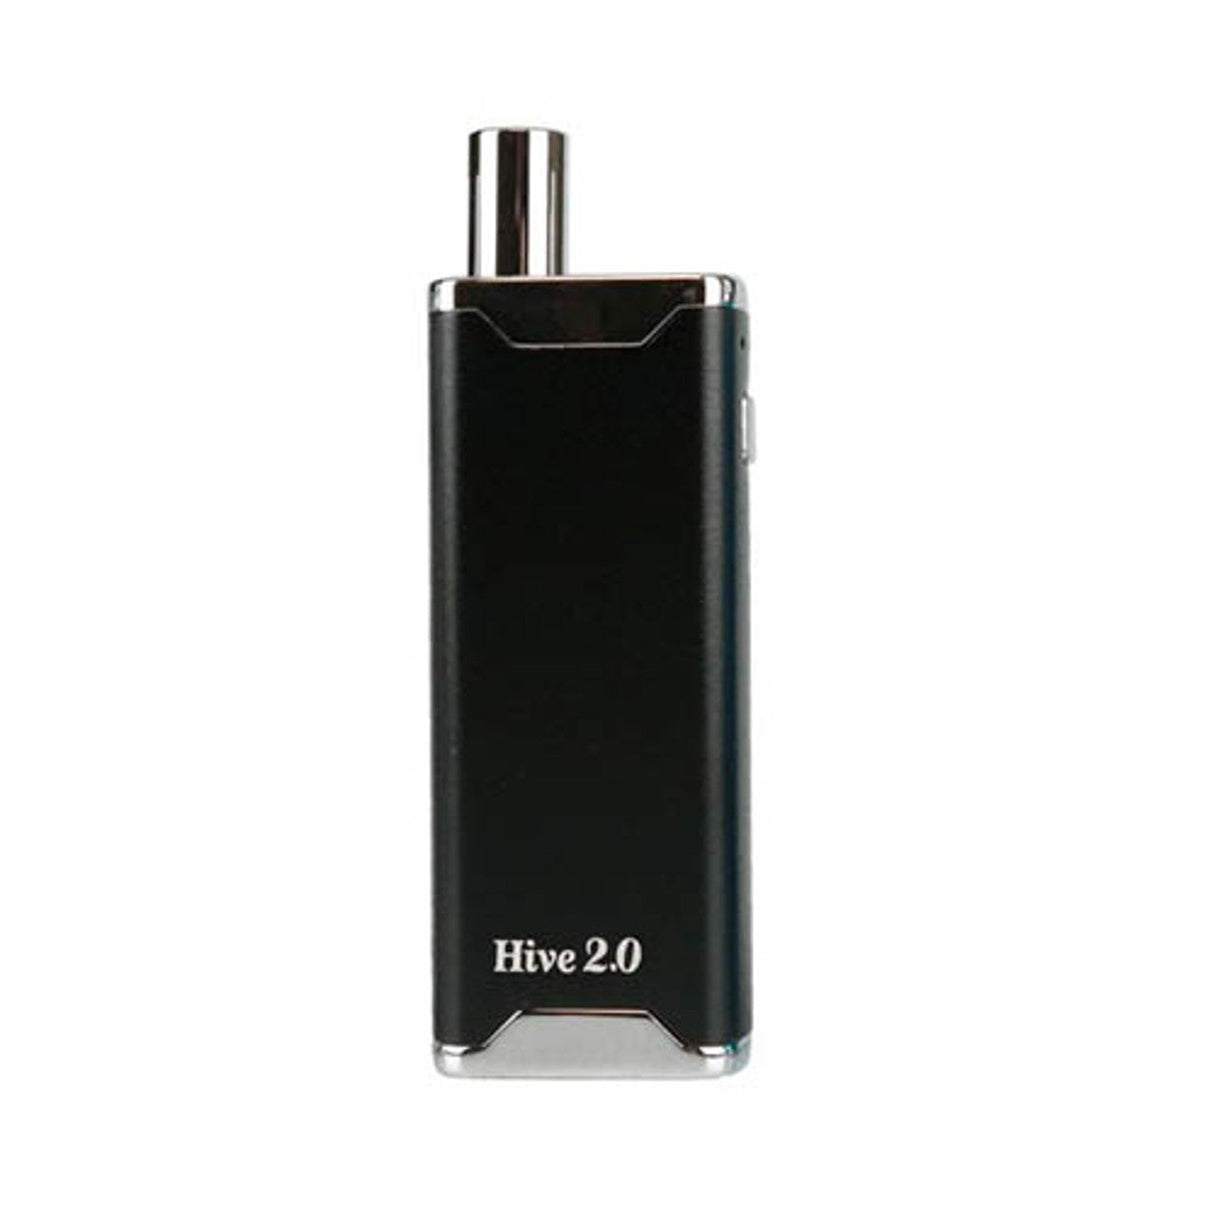 Yocan Hive 2.0 Vaporizer in Black, Compact 650mAh Battery for Concentrates, Front View